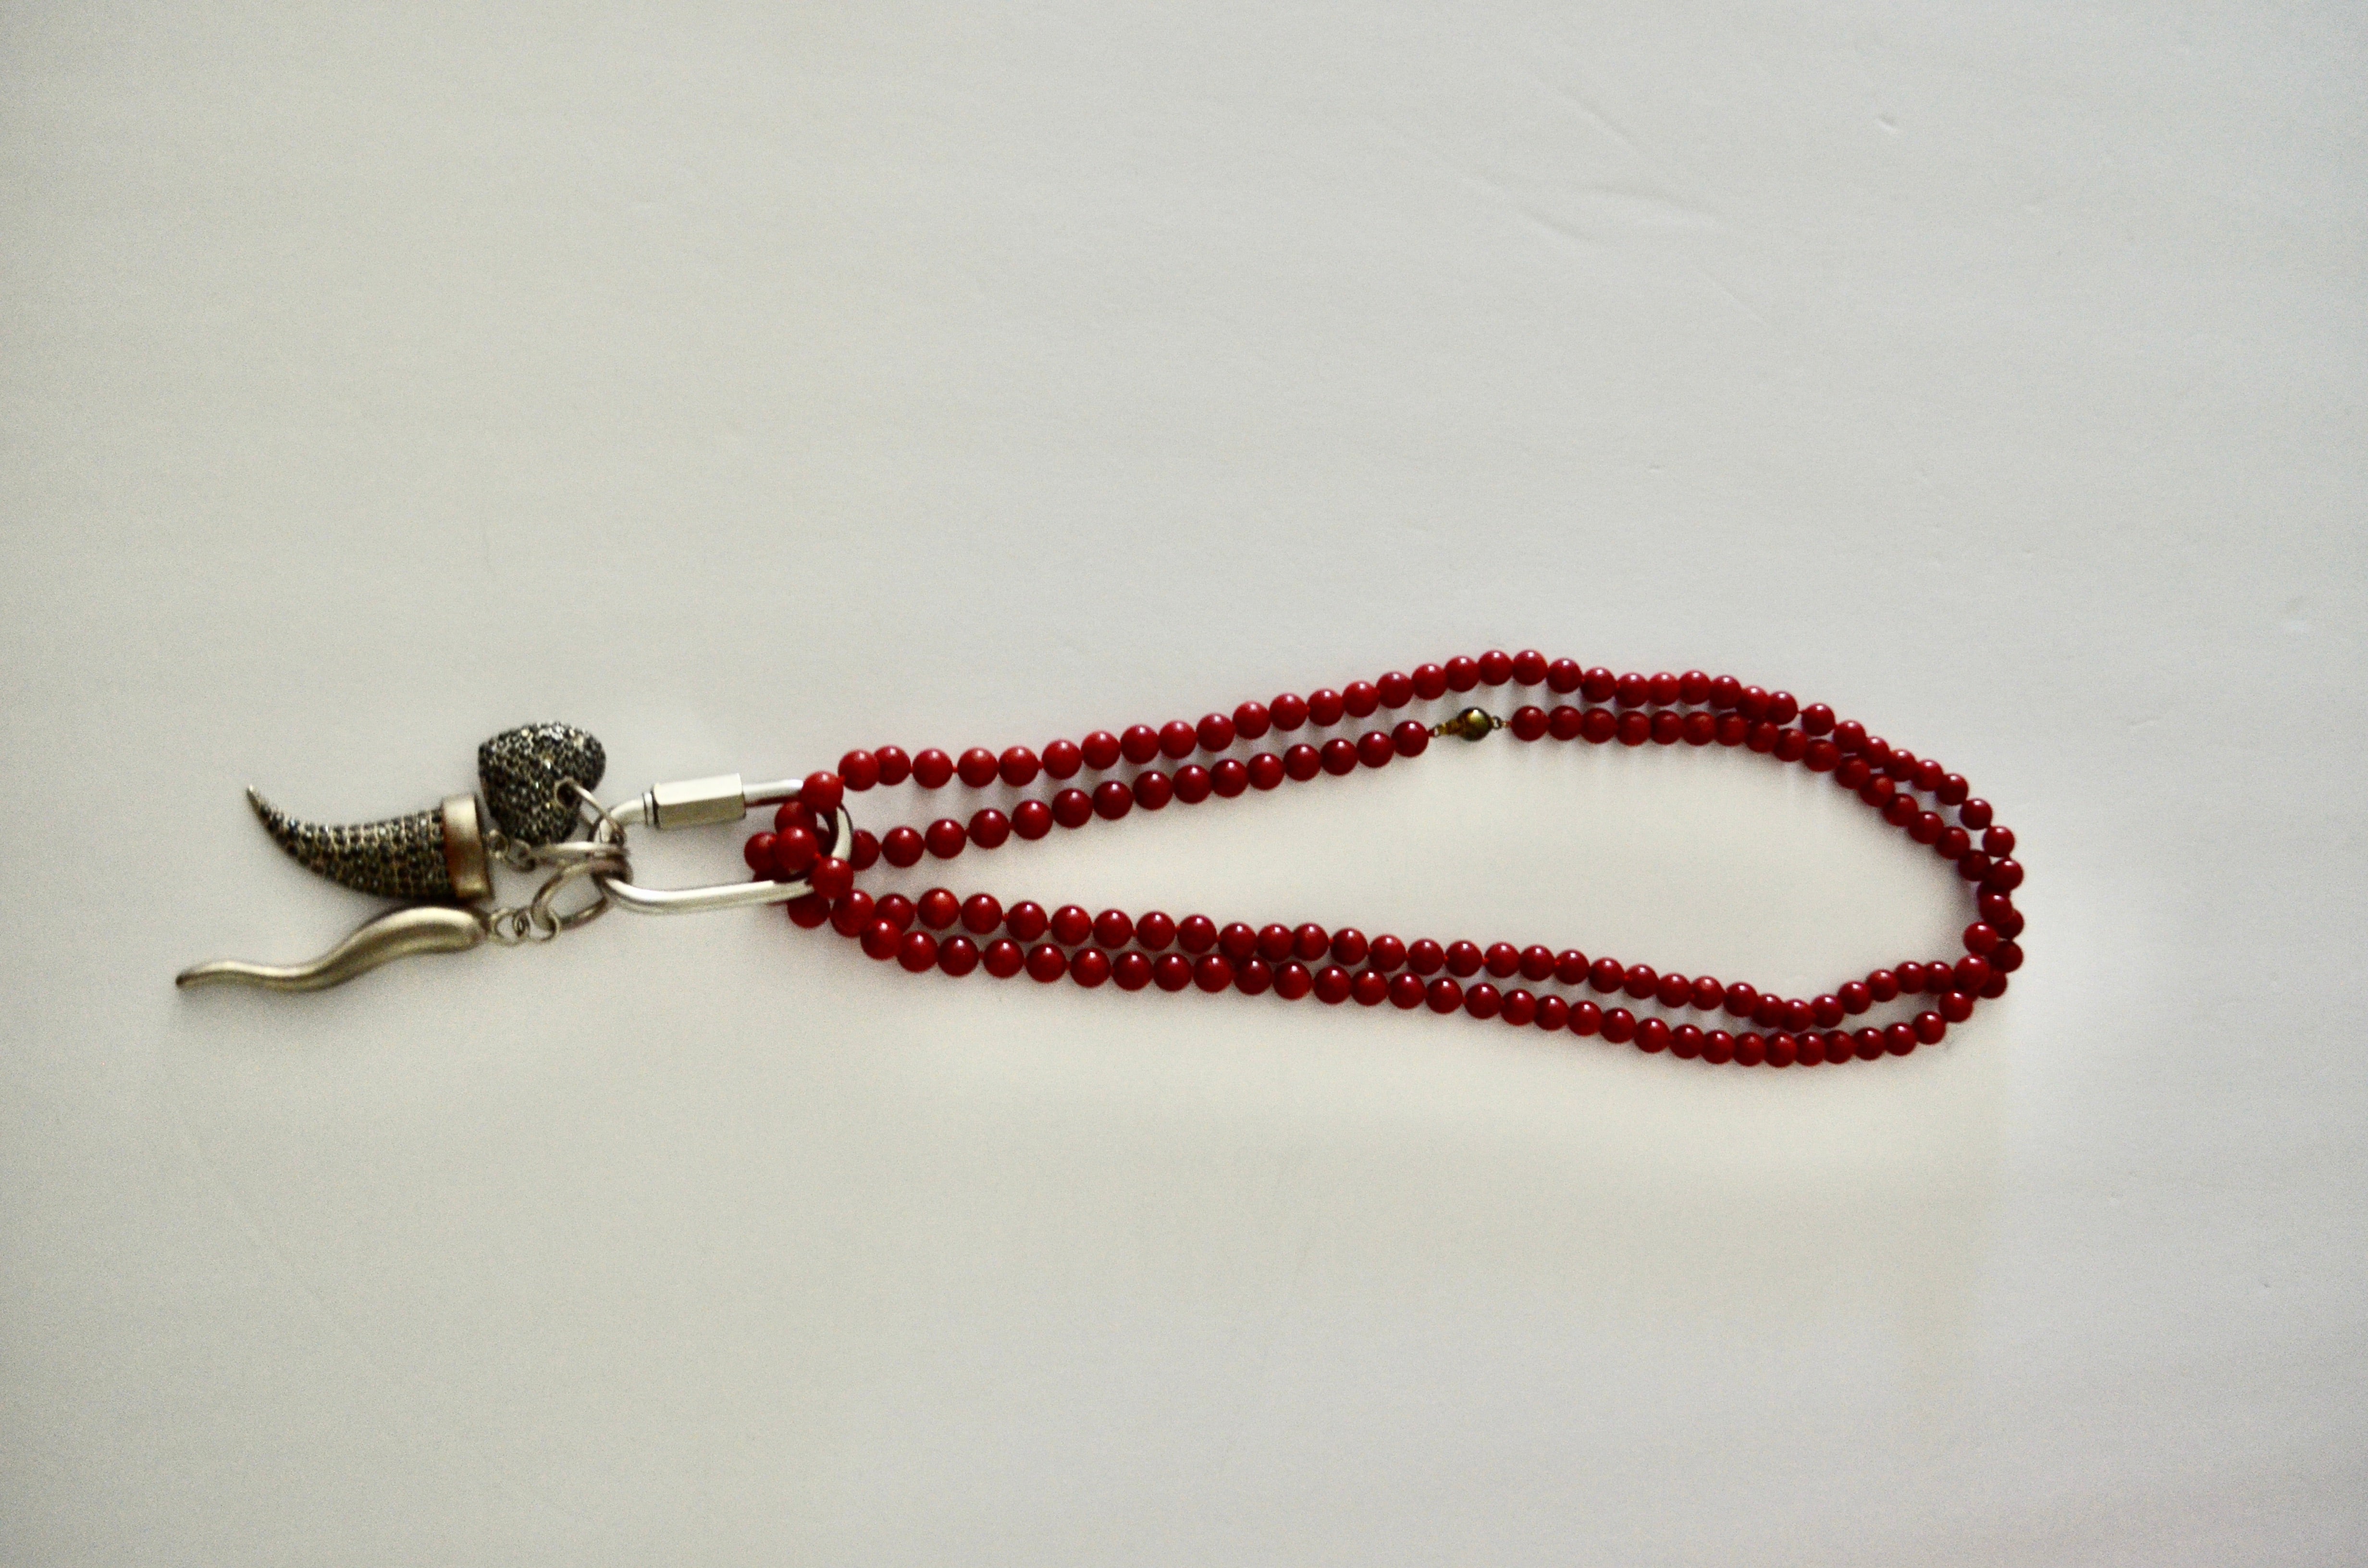 Coral Double Strand Necklace with Carabiner Lock Huge Pendants Statement Piece